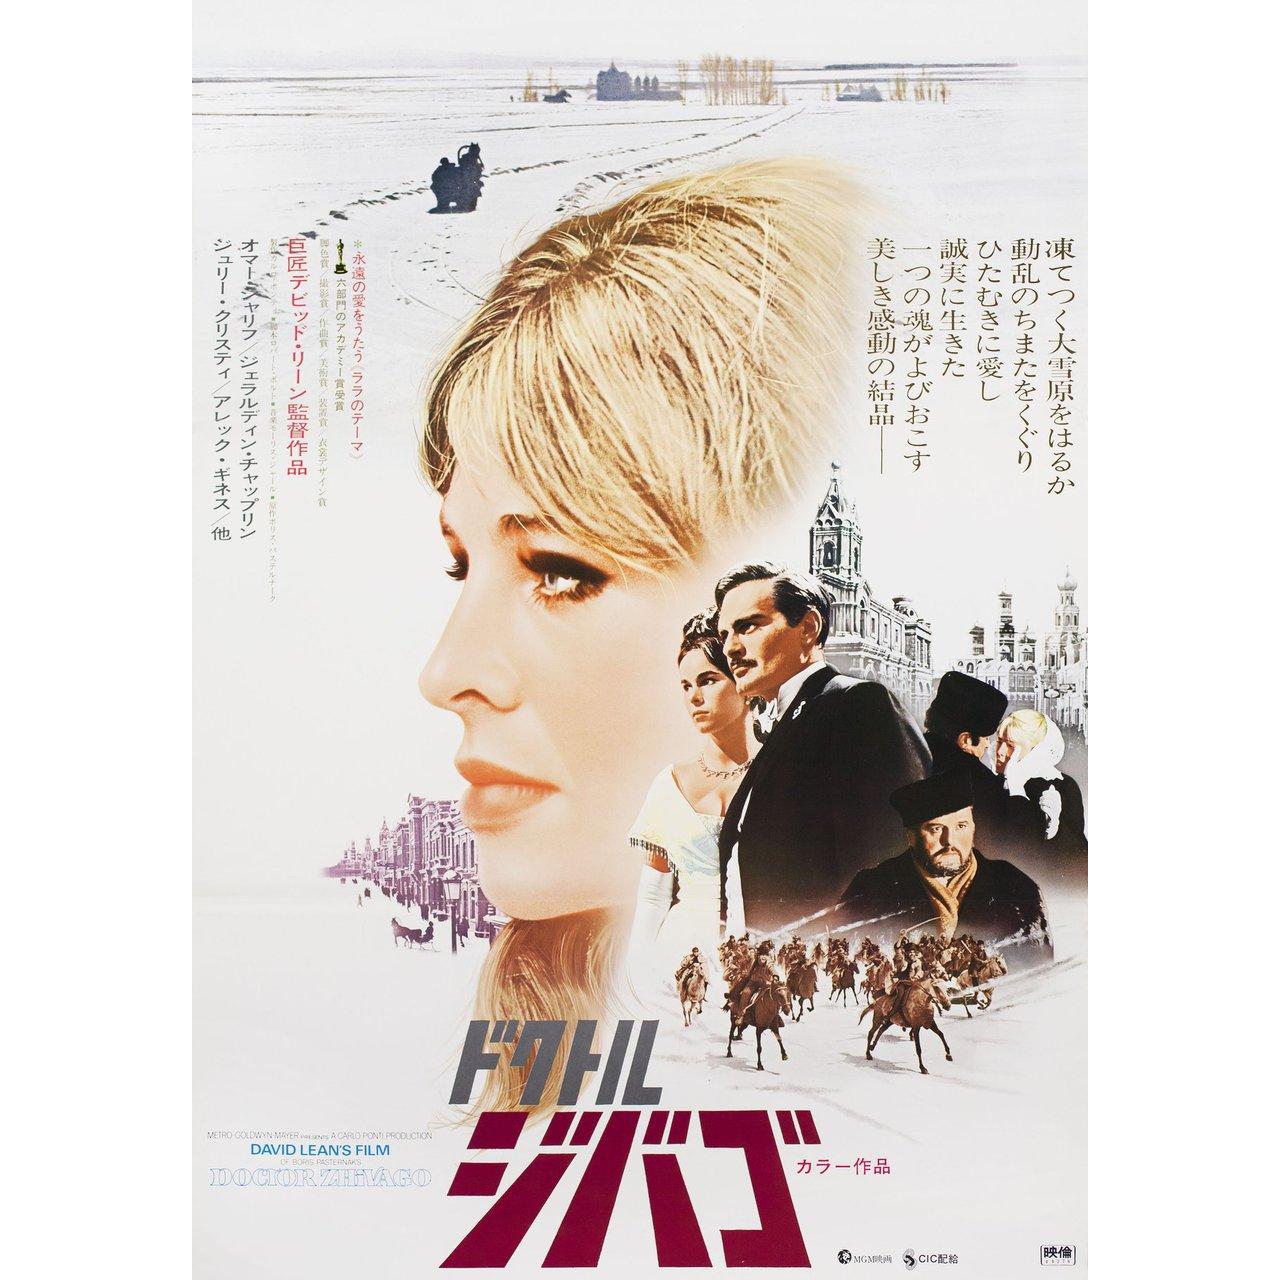 Original 1969 re-release Japanese B2 poster for the 1965 film Doctor Zhivago directed by David Lean with Omar Sharif / Julie Christie / Geraldine Chaplin / Rod Steiger. Fine condition, rolled. Please note: the size is stated in inches and the actual